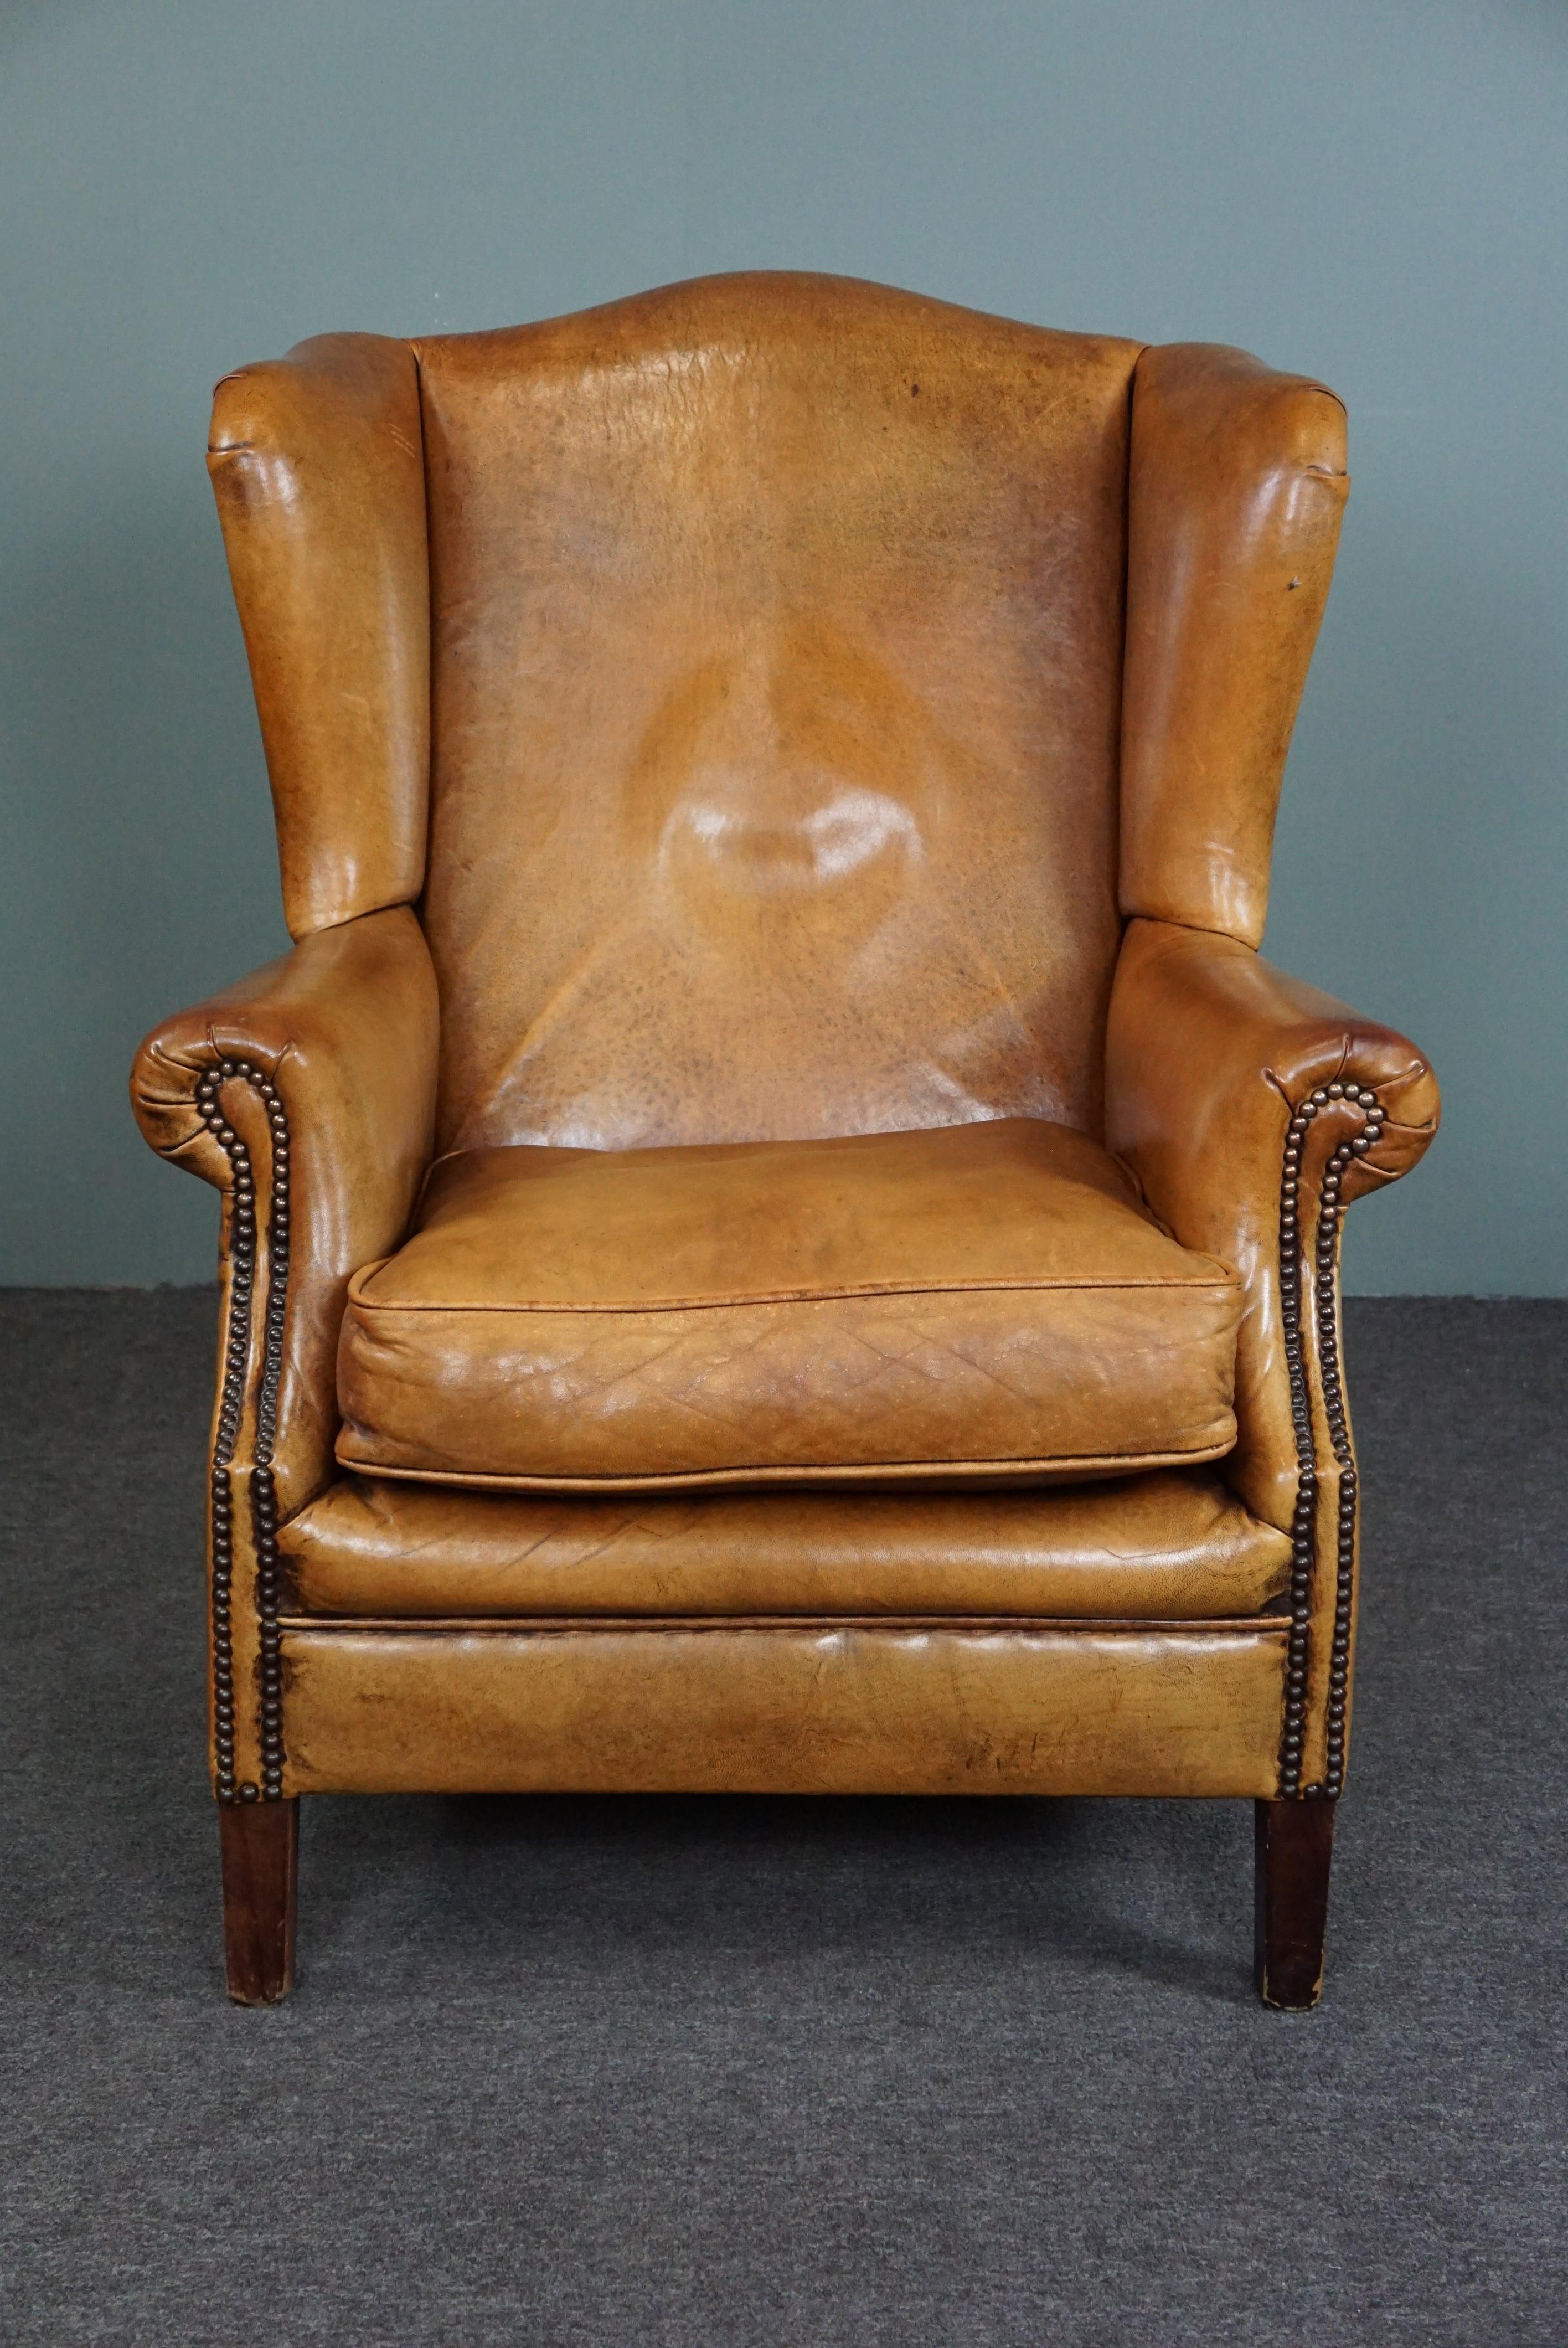 Offered is this beautiful warm-colored sheep leather wing chair finished with wooden legs and beautiful decorative nails.

This pearl has an unsurpassed expressive color with a beautiful patina.
Anyone who takes this unique eye-catcher into their